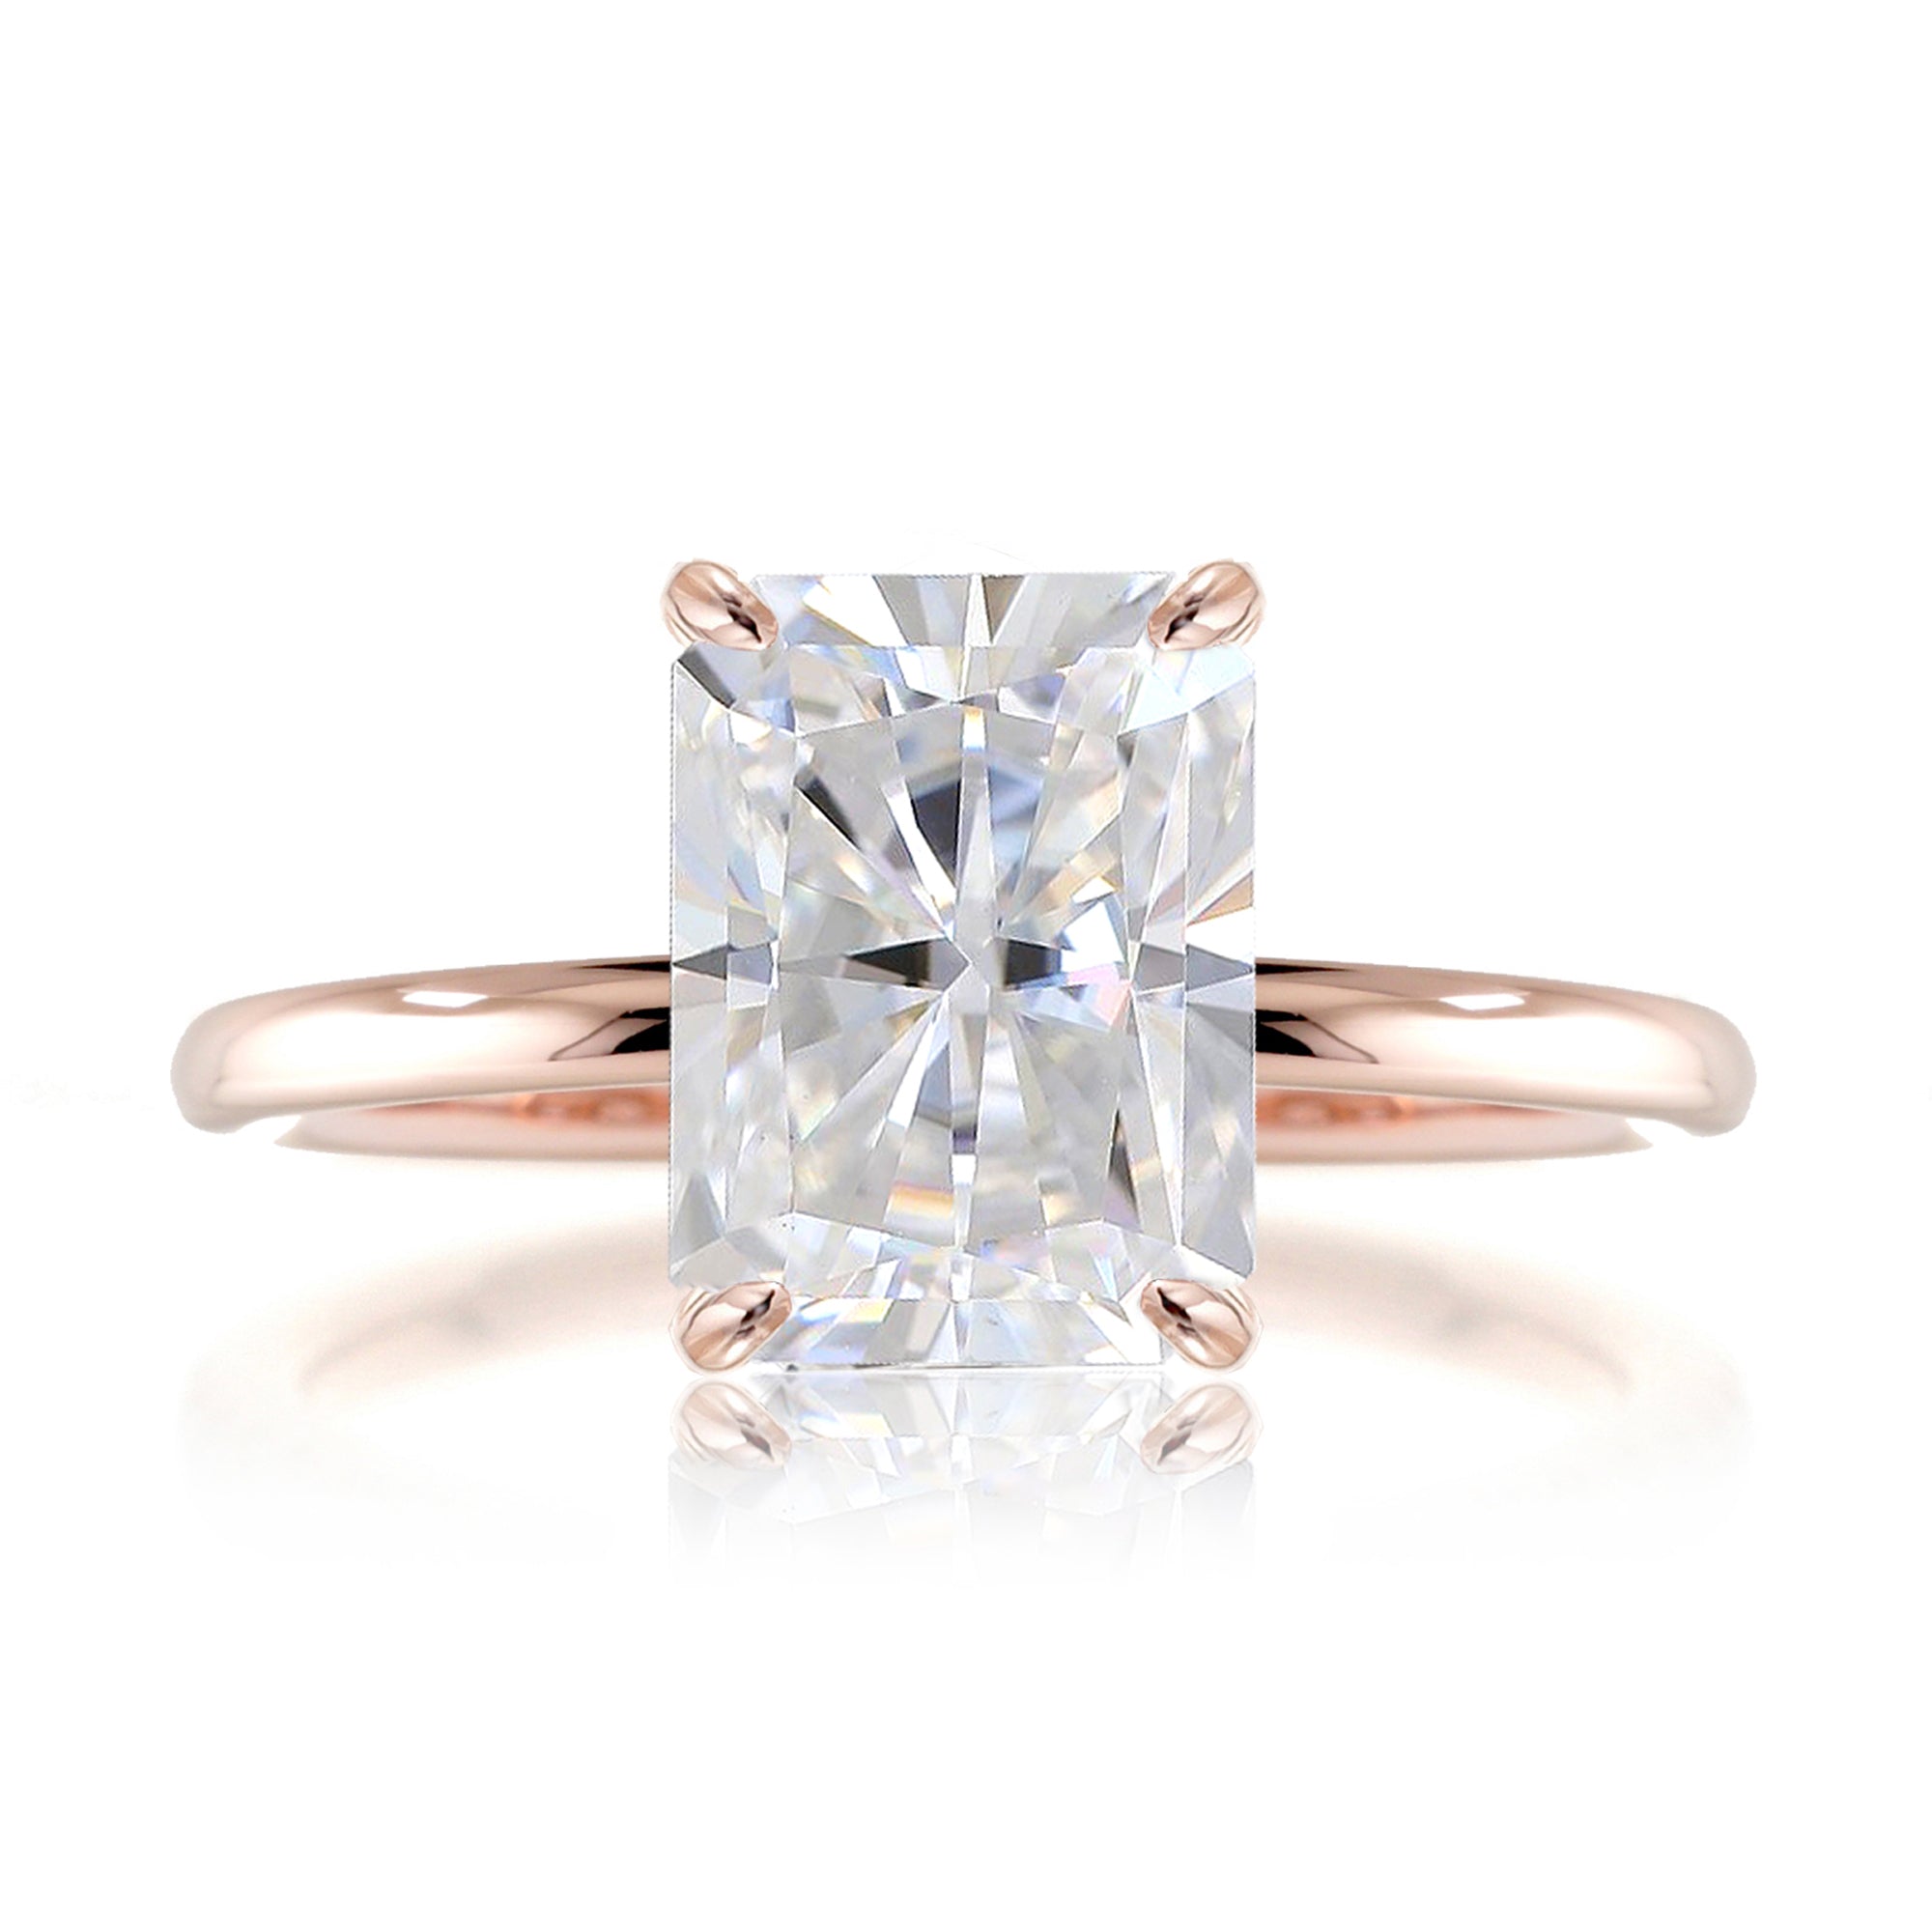 Radiant cut moissanite solid band engagement ring rose gold - The Ava